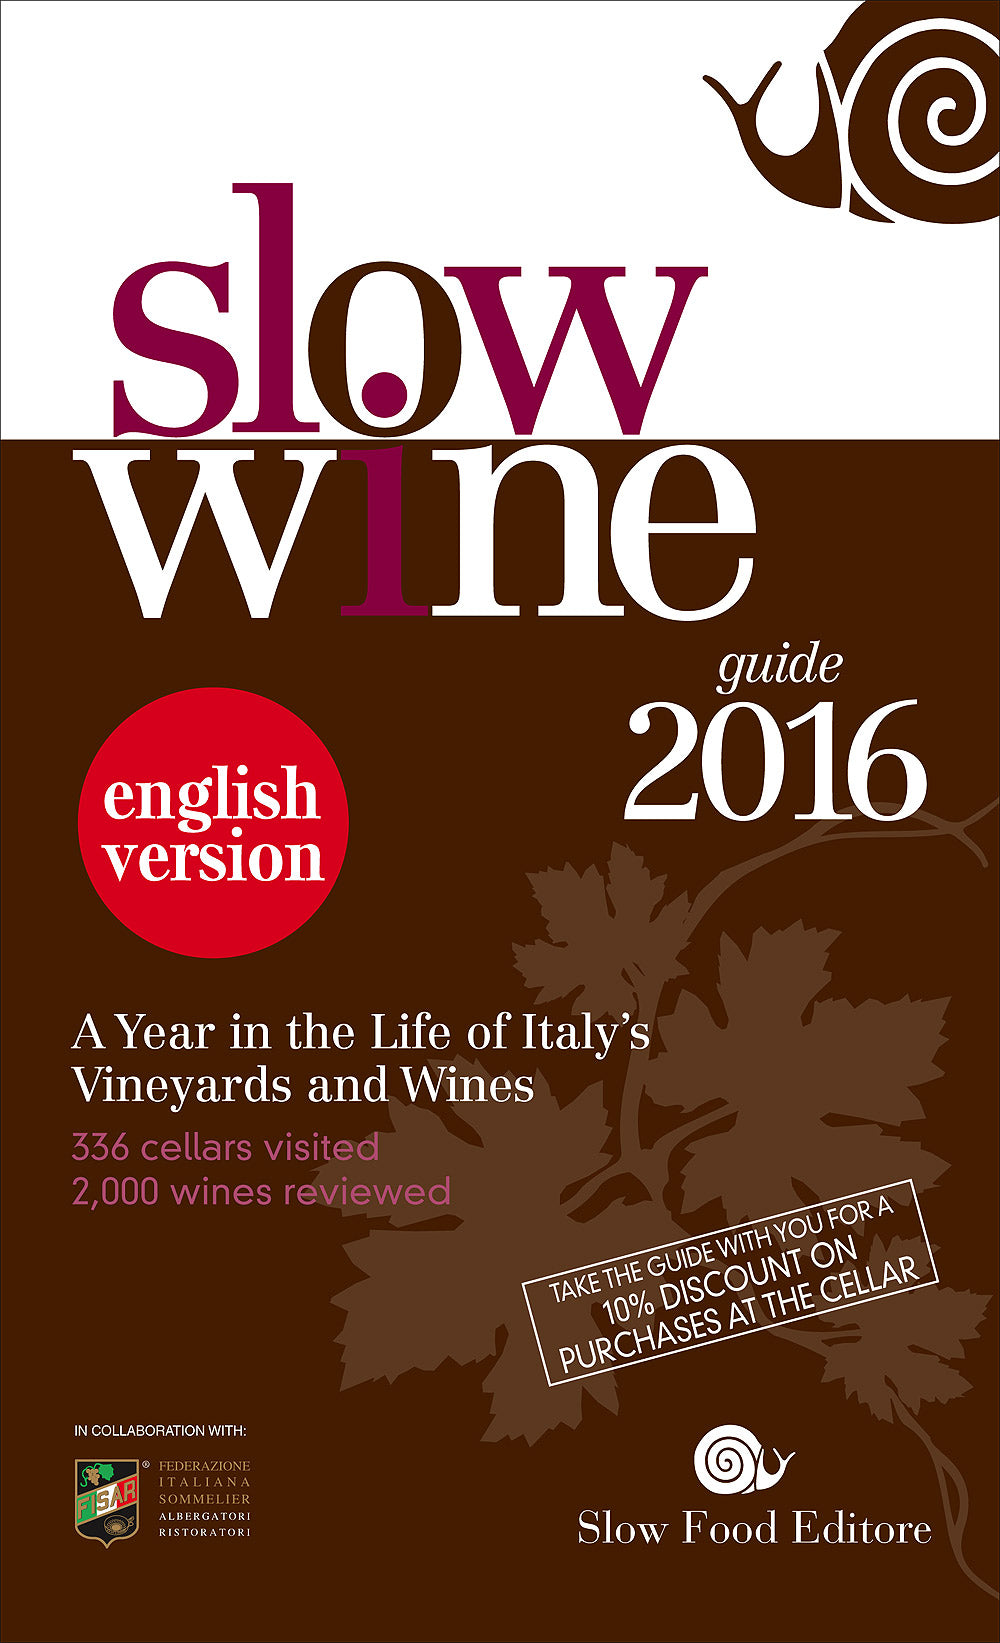 Slow Wine - guide 2016::A Year in the Life of Italy's Vineyards and Wines - 336 cellars visited, 2000 wines reviewed